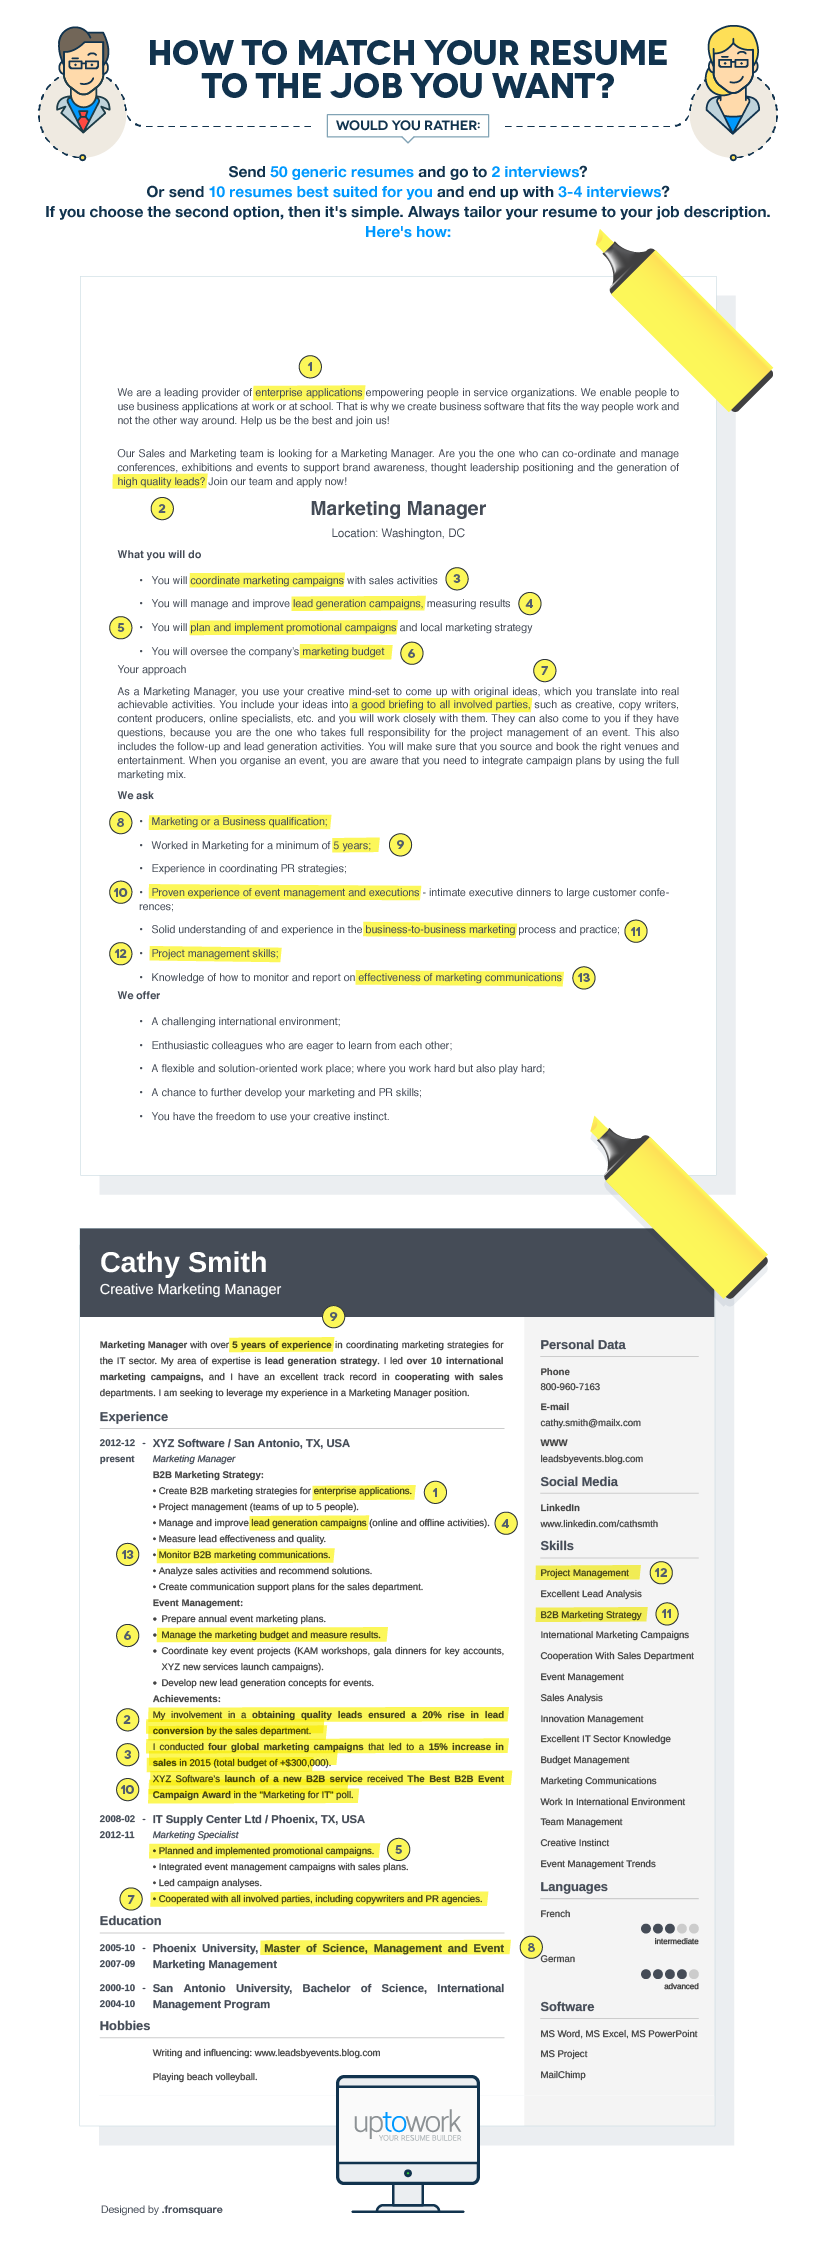 Infographic: How to make a resume that is tailored to any job offer